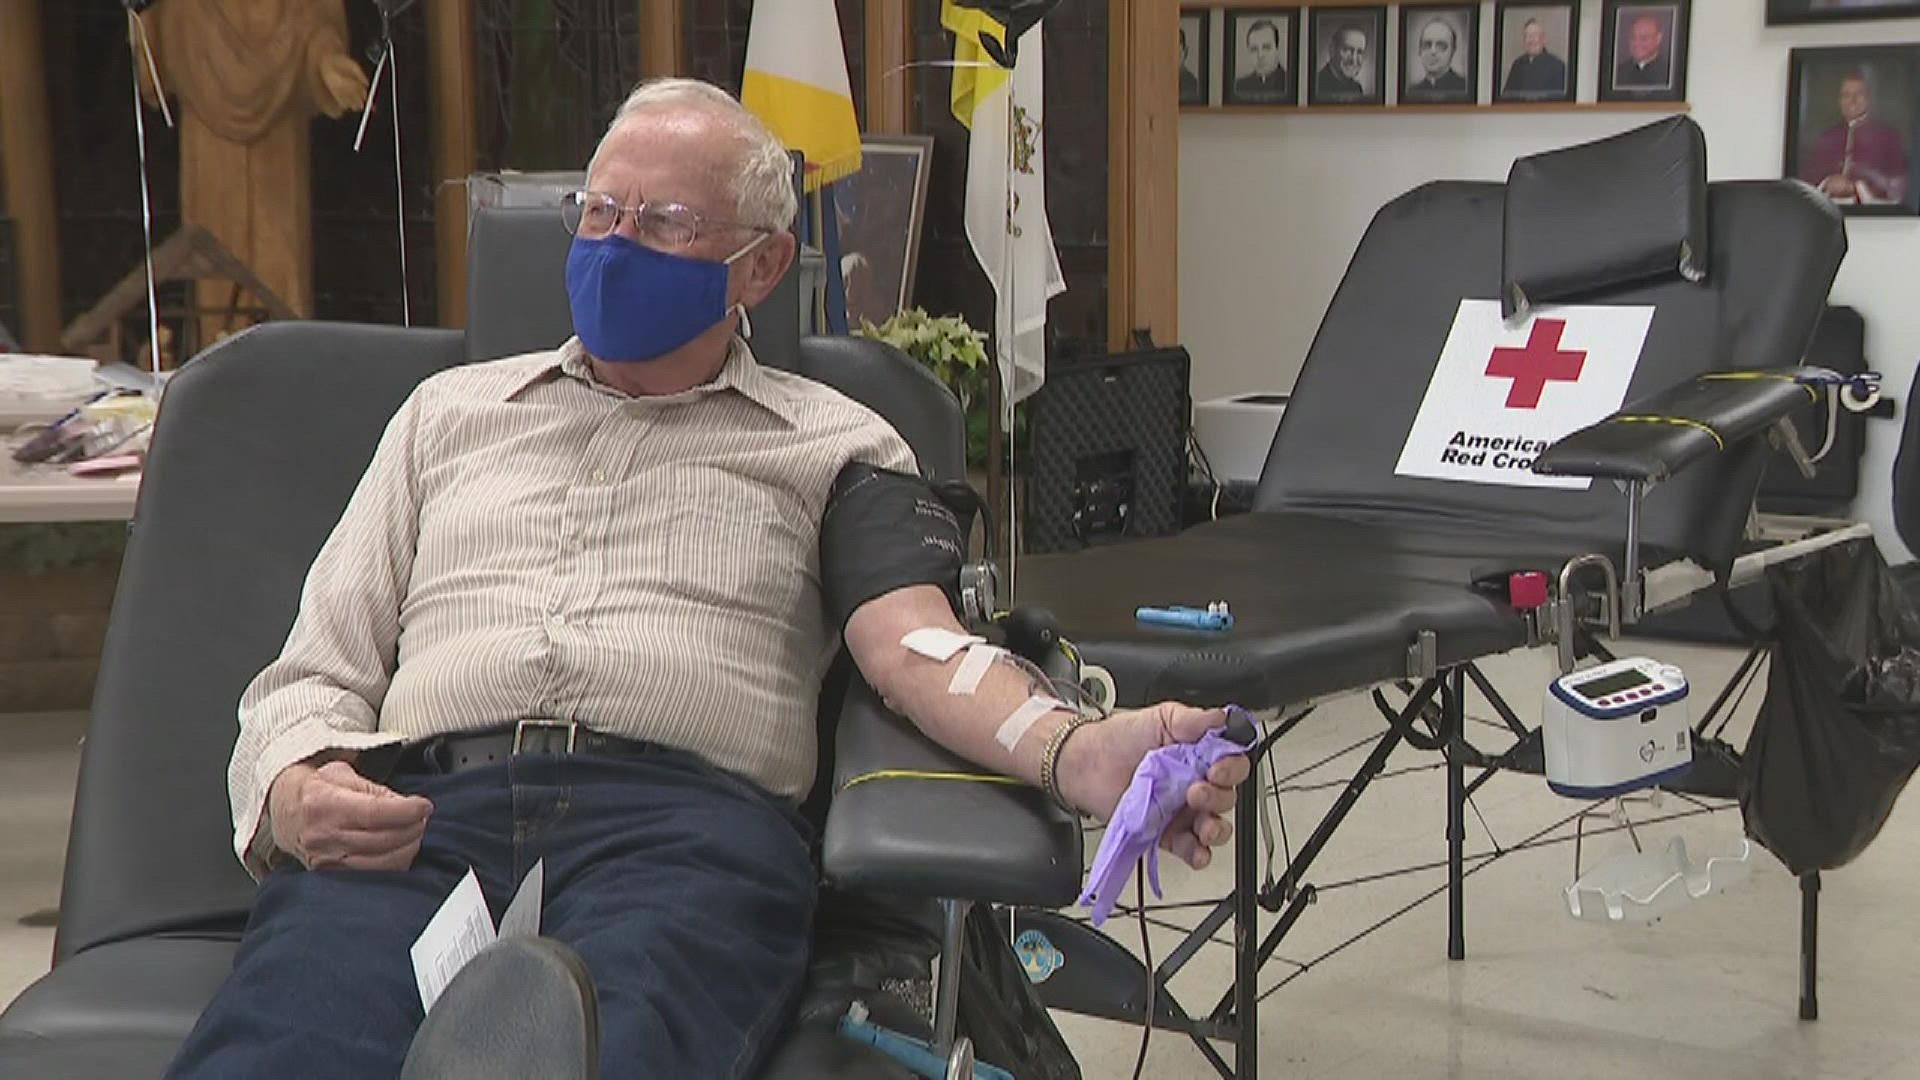 The retired farmer has donated nearly 30 gallons in his life and has a blood-type commonly involved in transfusions for newborn babies.